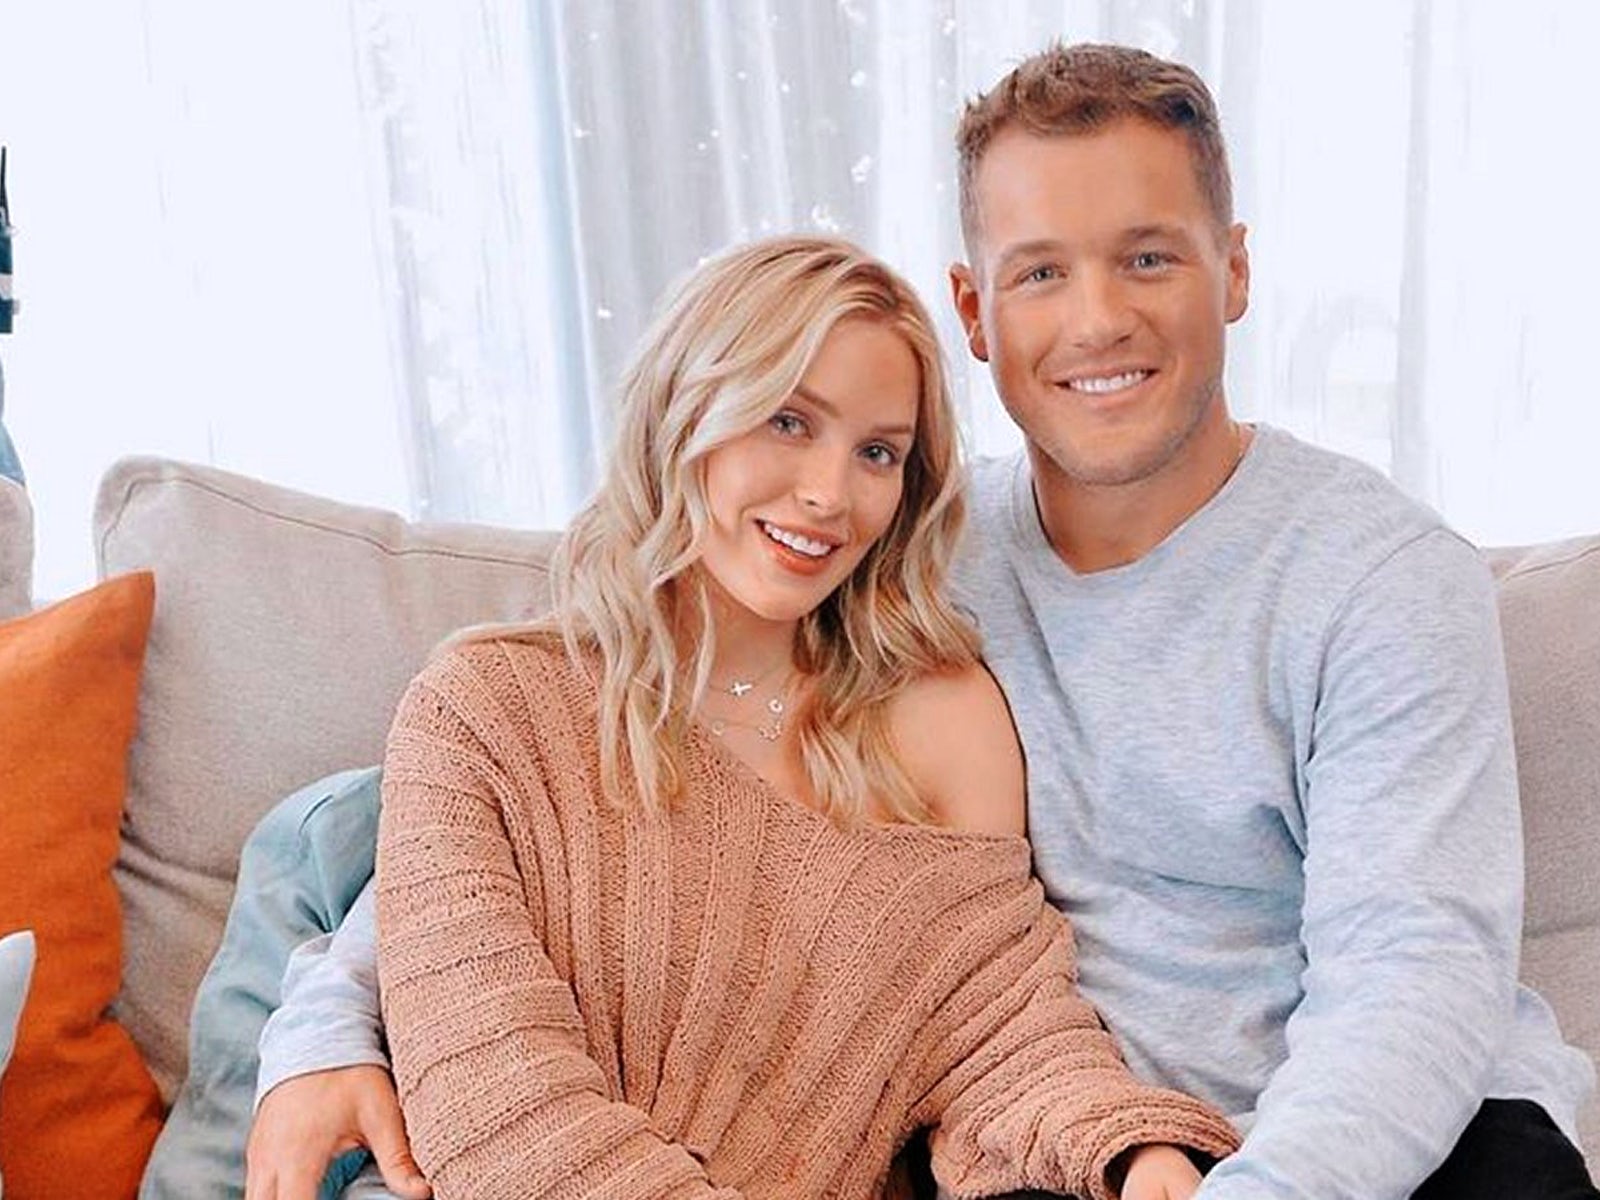 'The Bachelor' couple Colton Underwood and Cassie Randolph's breakup